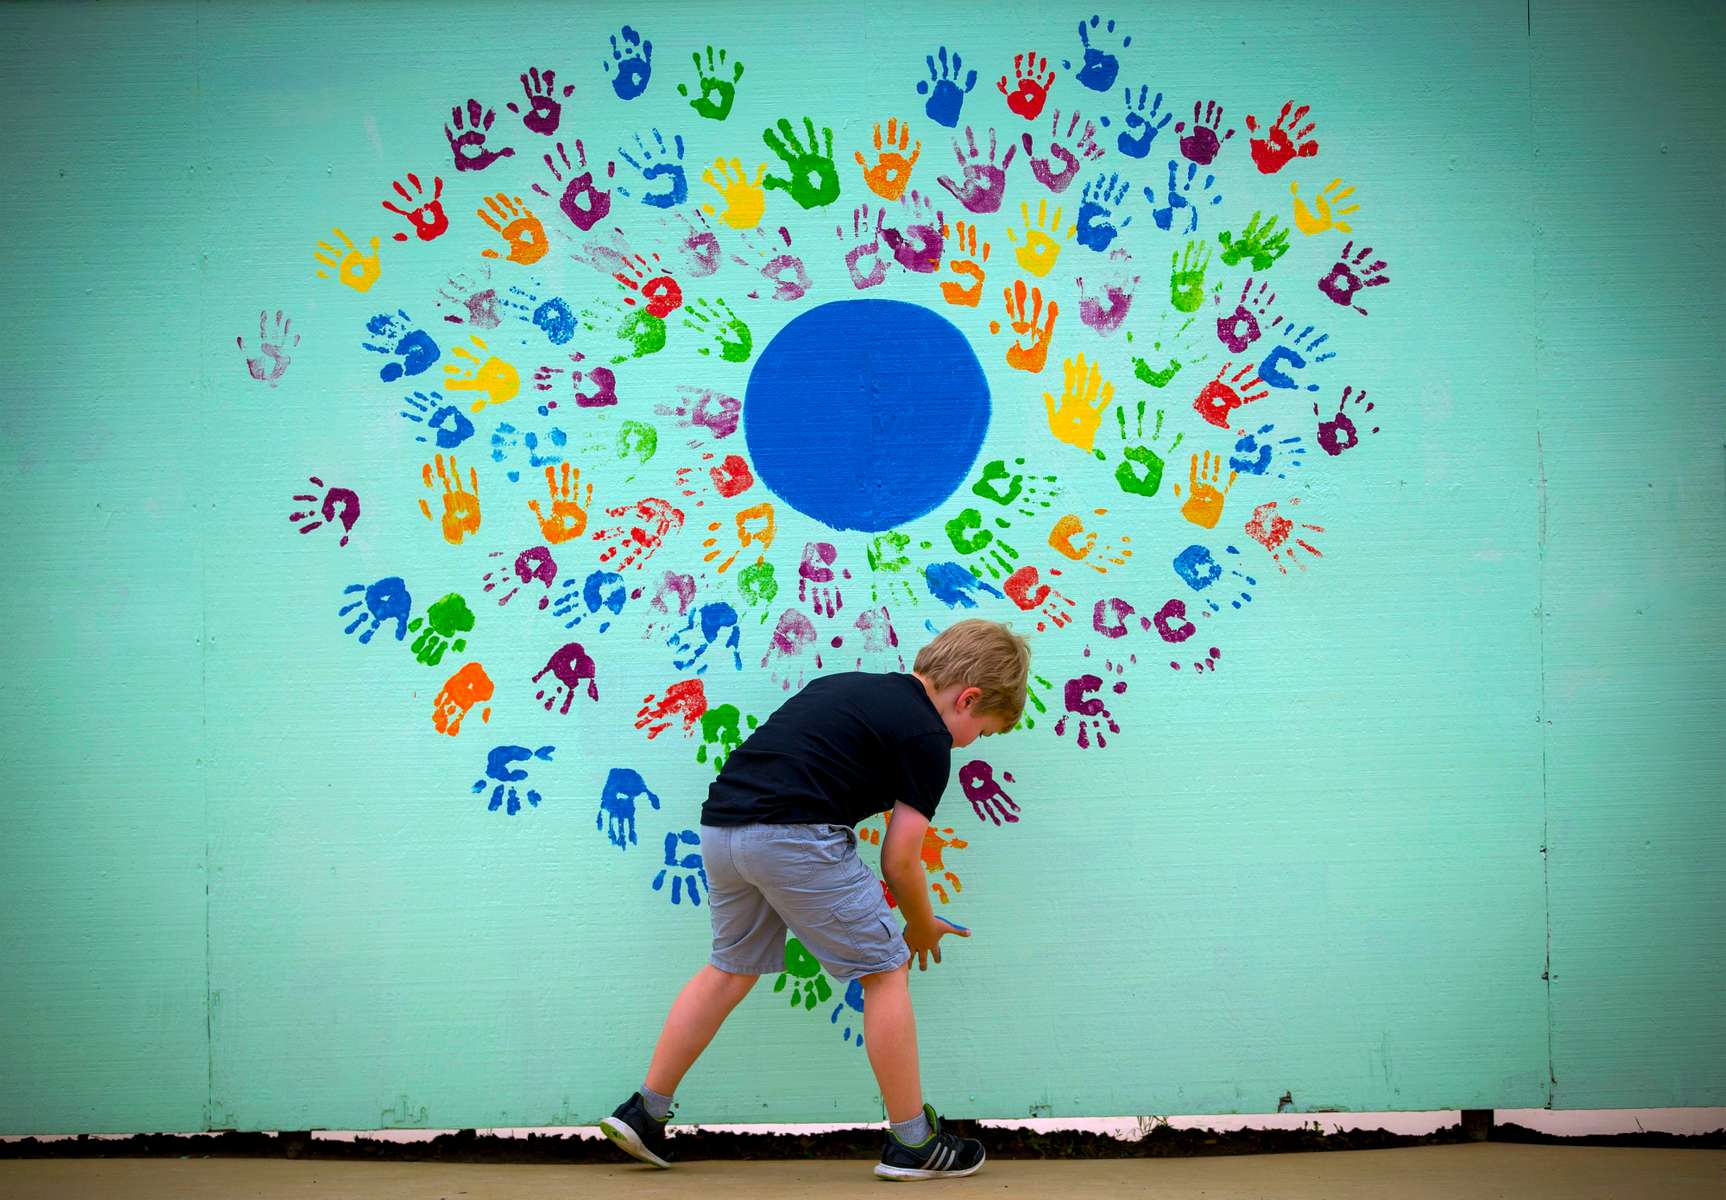 Second grader Harper Stiles puts his handprint on a mural with fellow students' prints during Earth Day activities at Adams Elementary School in Eugene, Ore., Friday, April 20, 2018. The activities were part of a partnership with the school and the University of Oregon's Environmental Leadership Program. There were nine different stations at which the students participated in activities like understanding recycling practices, a solar oven, tent-building relay races, planting and weeding in the school's garden, and planting 13 trees near the school. Earth Day began in 1970 and is officially on April 22.  (Andy Nelson/The Register-Guard via AP)